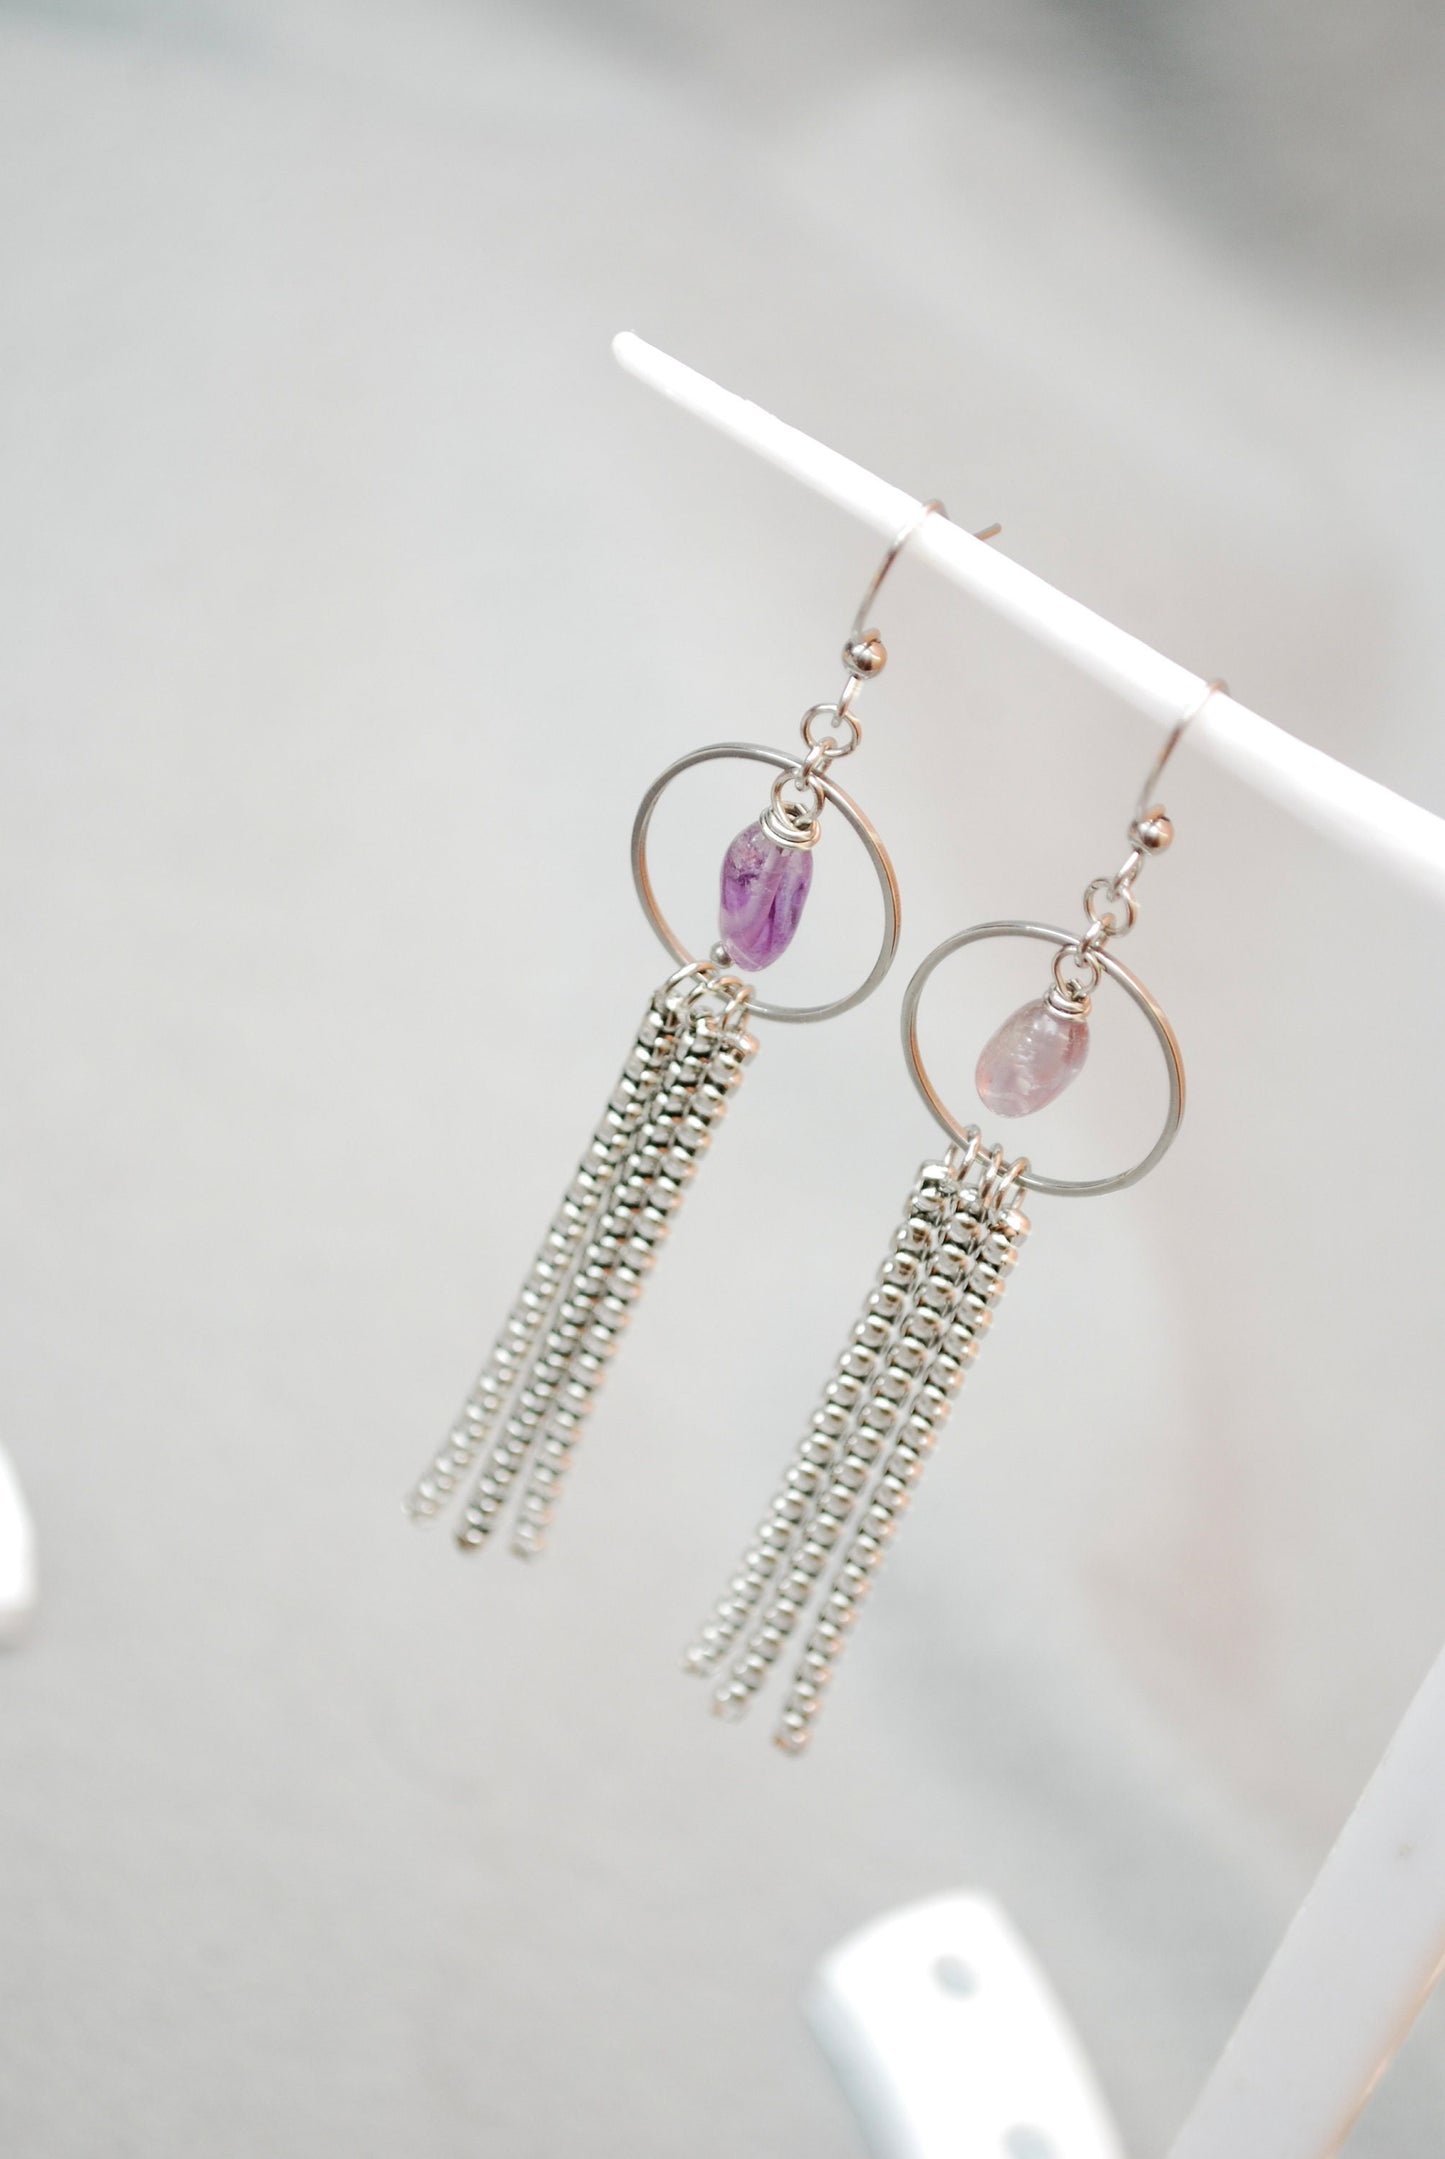 Vibrant Stainless Steel Earrings with Amethyst Beads: Playful Accessories for the Modern Fashionista! Estibela design. 10cm - 4"